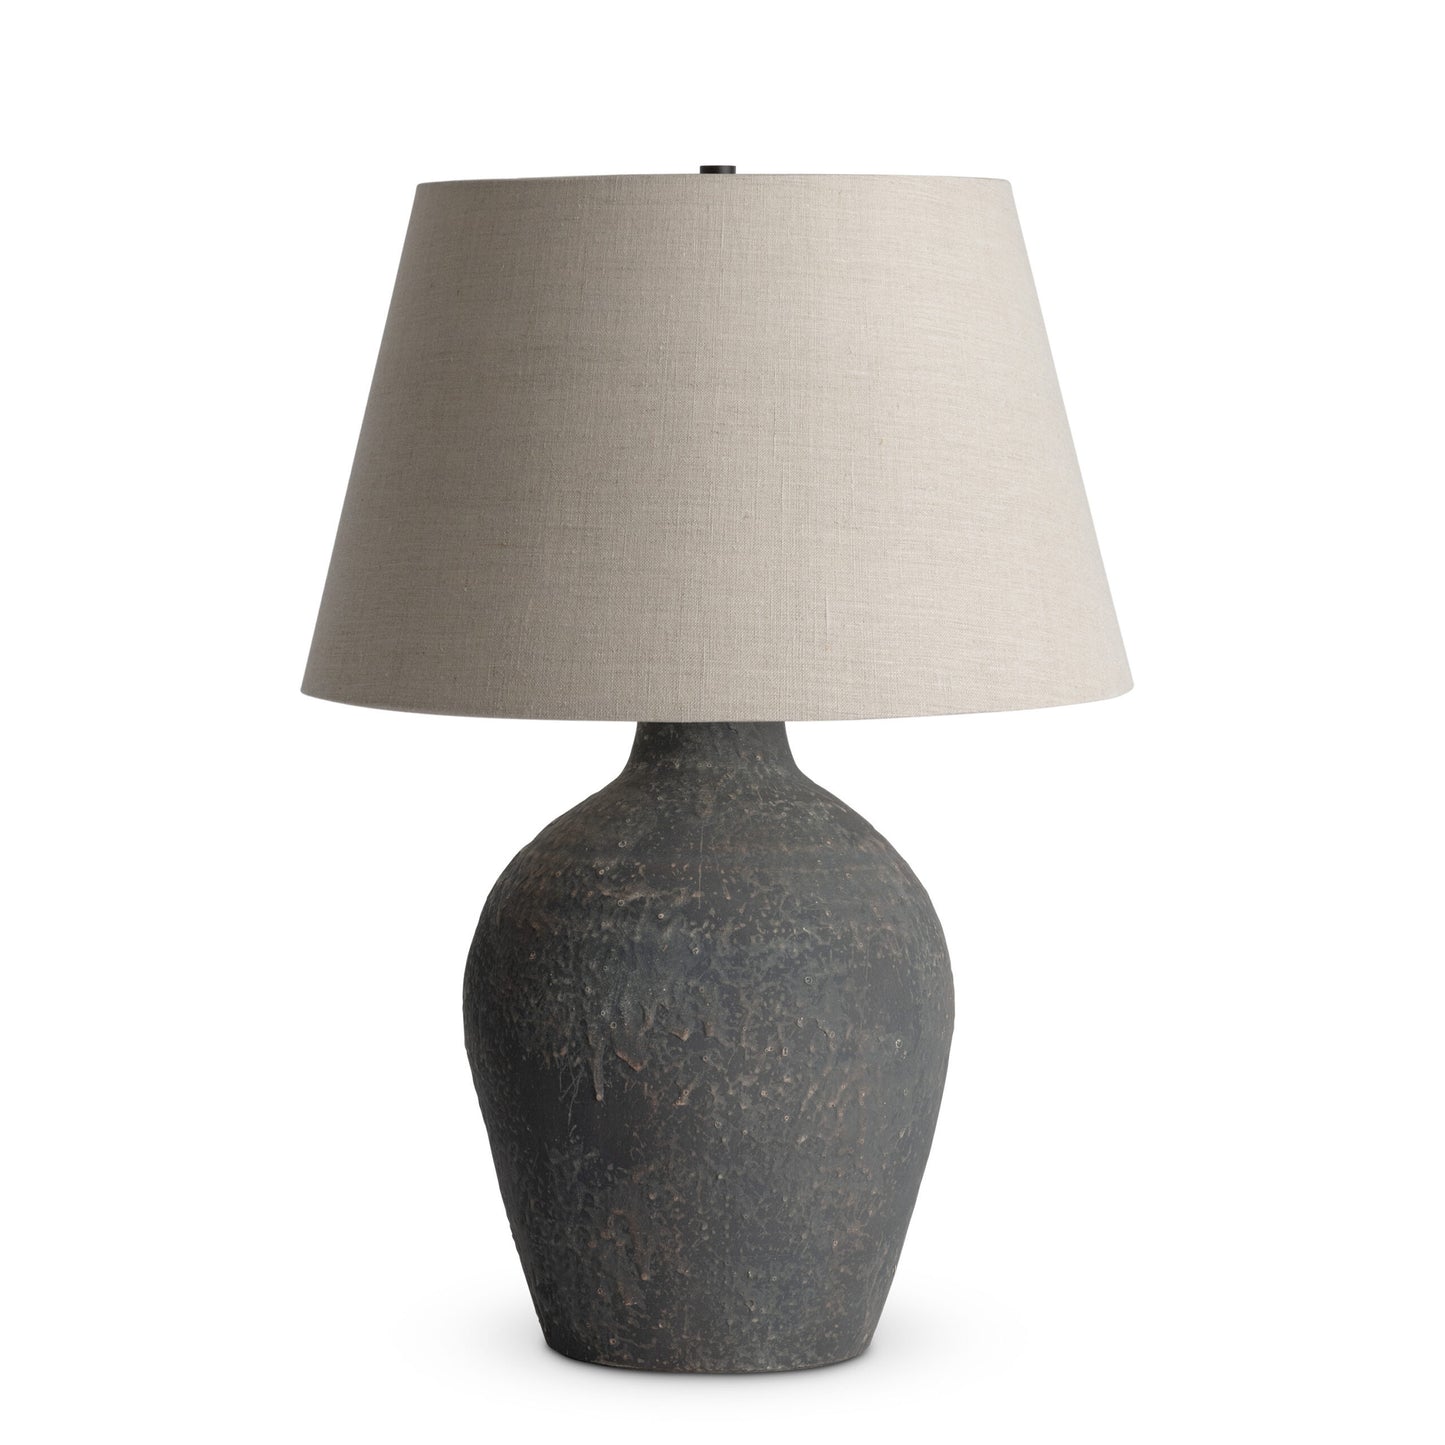 Thea Table Lamp Biege Shade